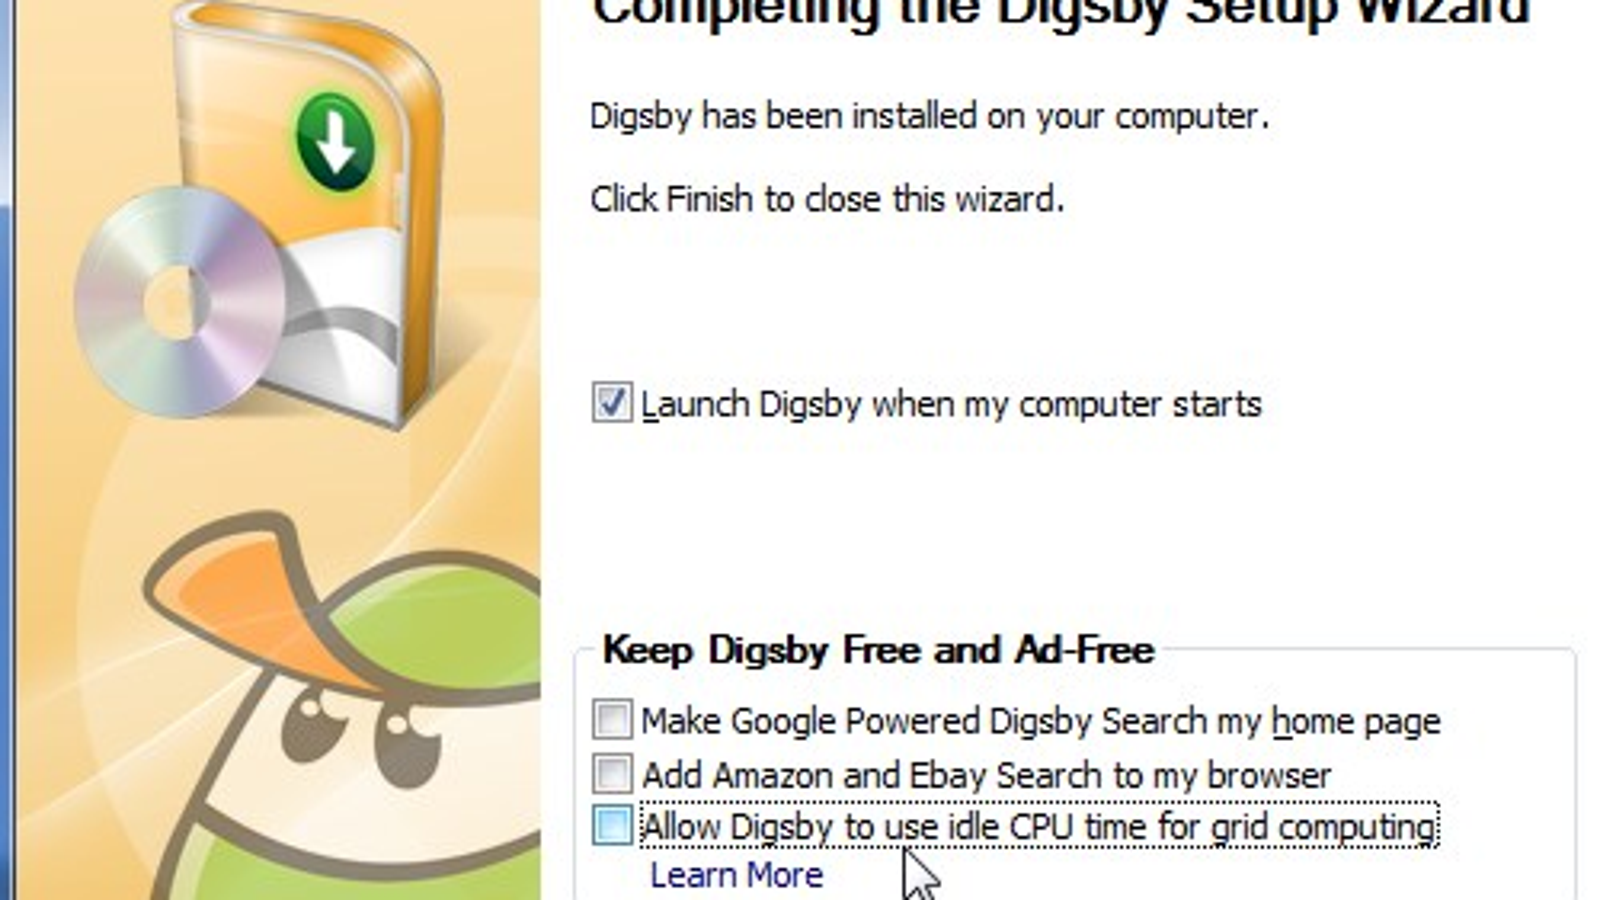 digsby